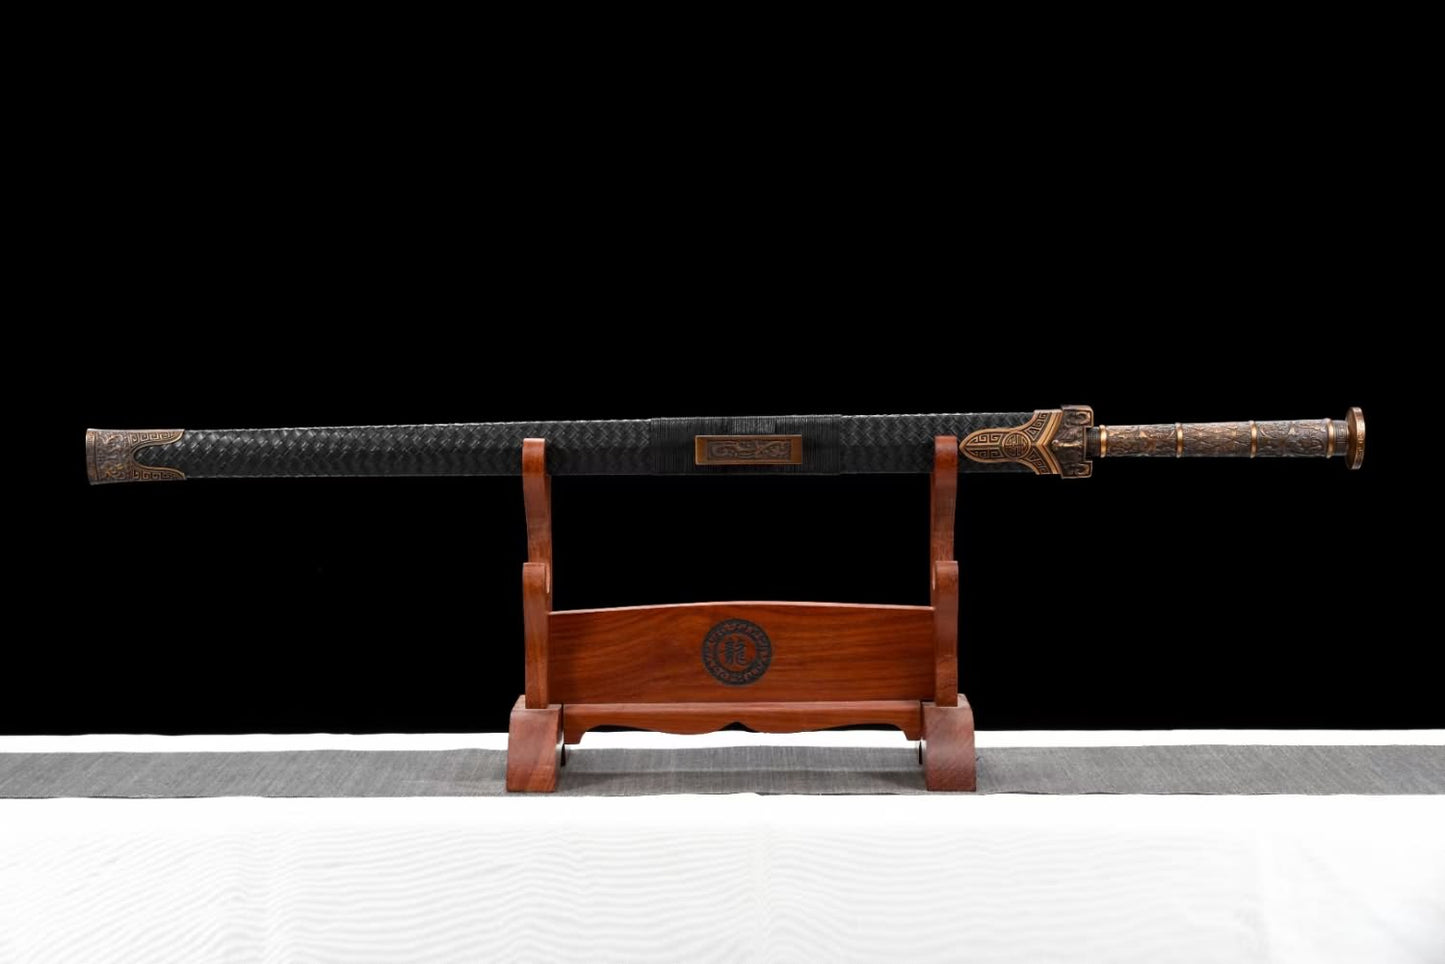 Longyuan jian Sword Forged High Carbon Steel Etched Blade,Alloy Fittings,Solid Wood Scabbard